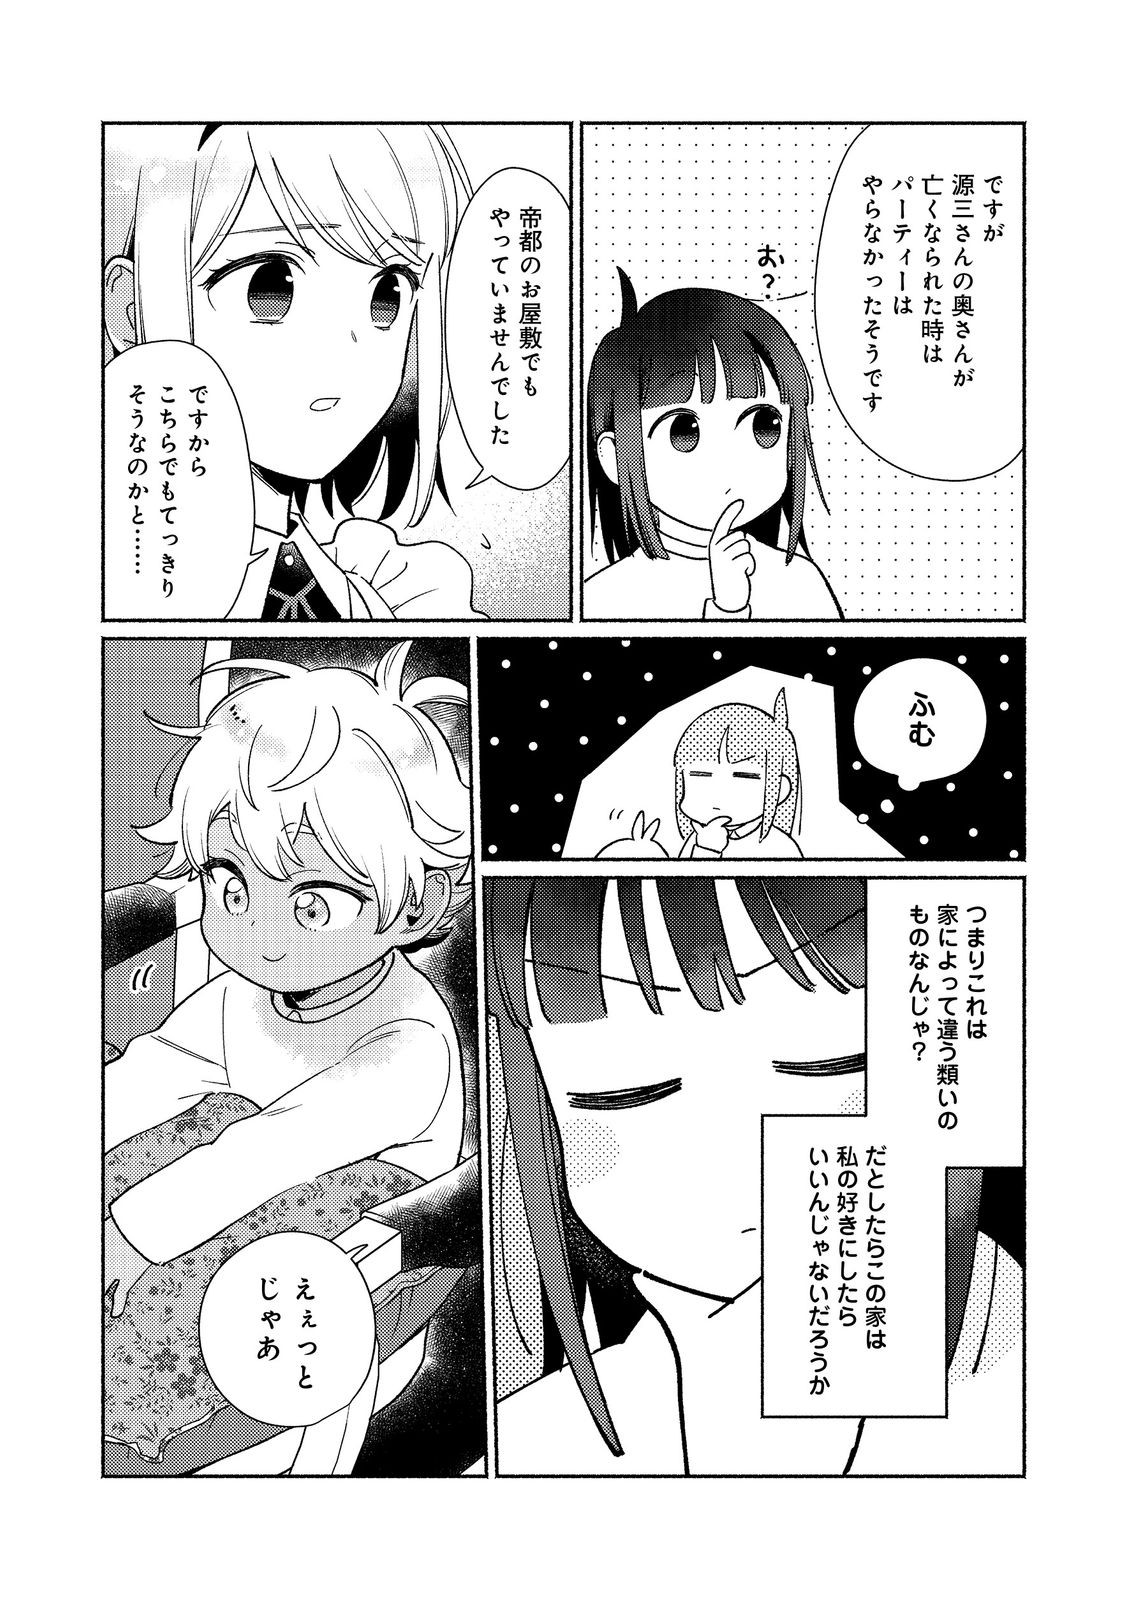 I’m the White Pig Nobleman 第24.1話 - Page 10